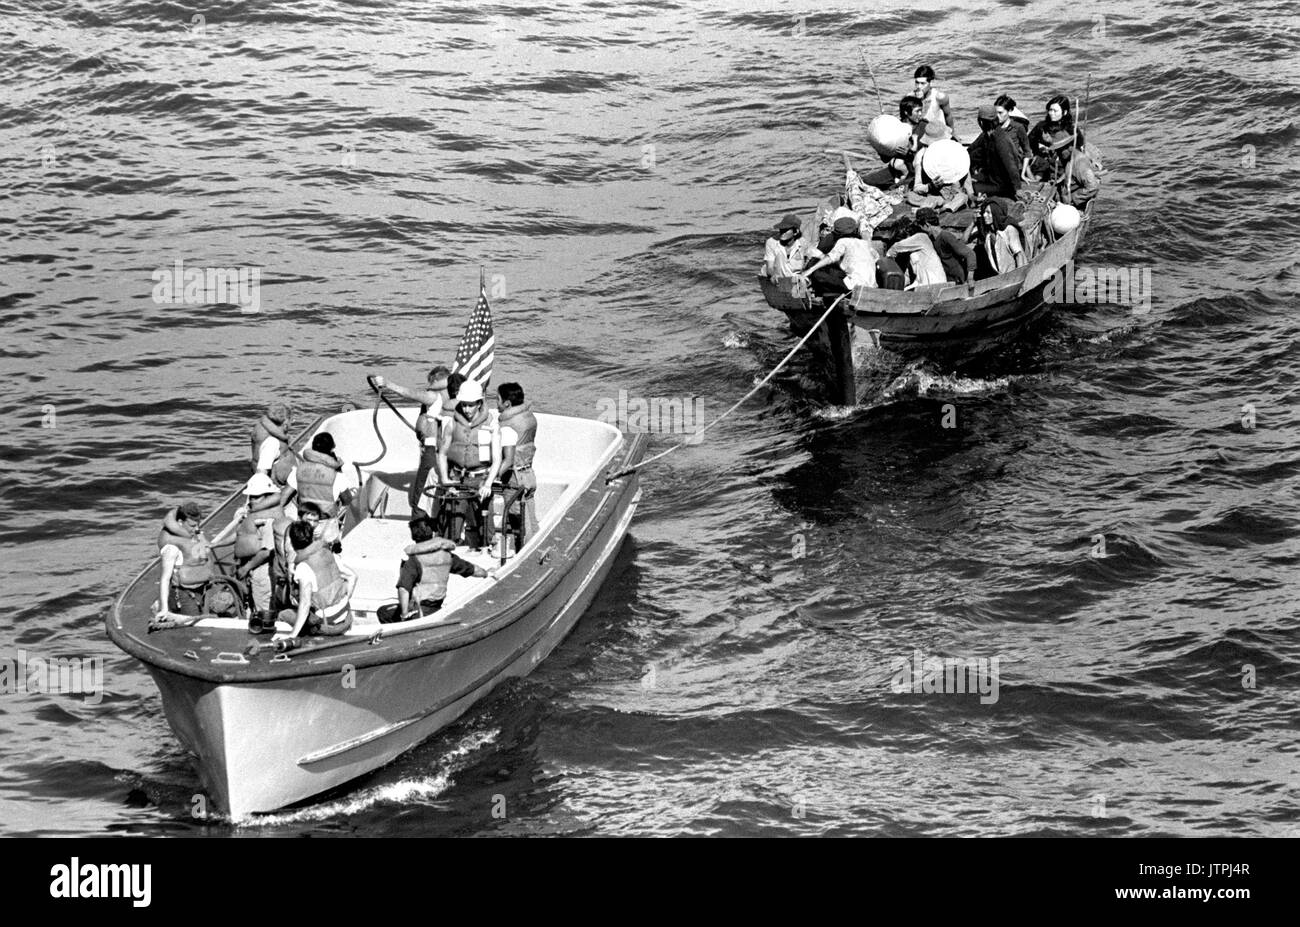 Vietnamese boat people Black and White Stock Photos & Images - Alamy